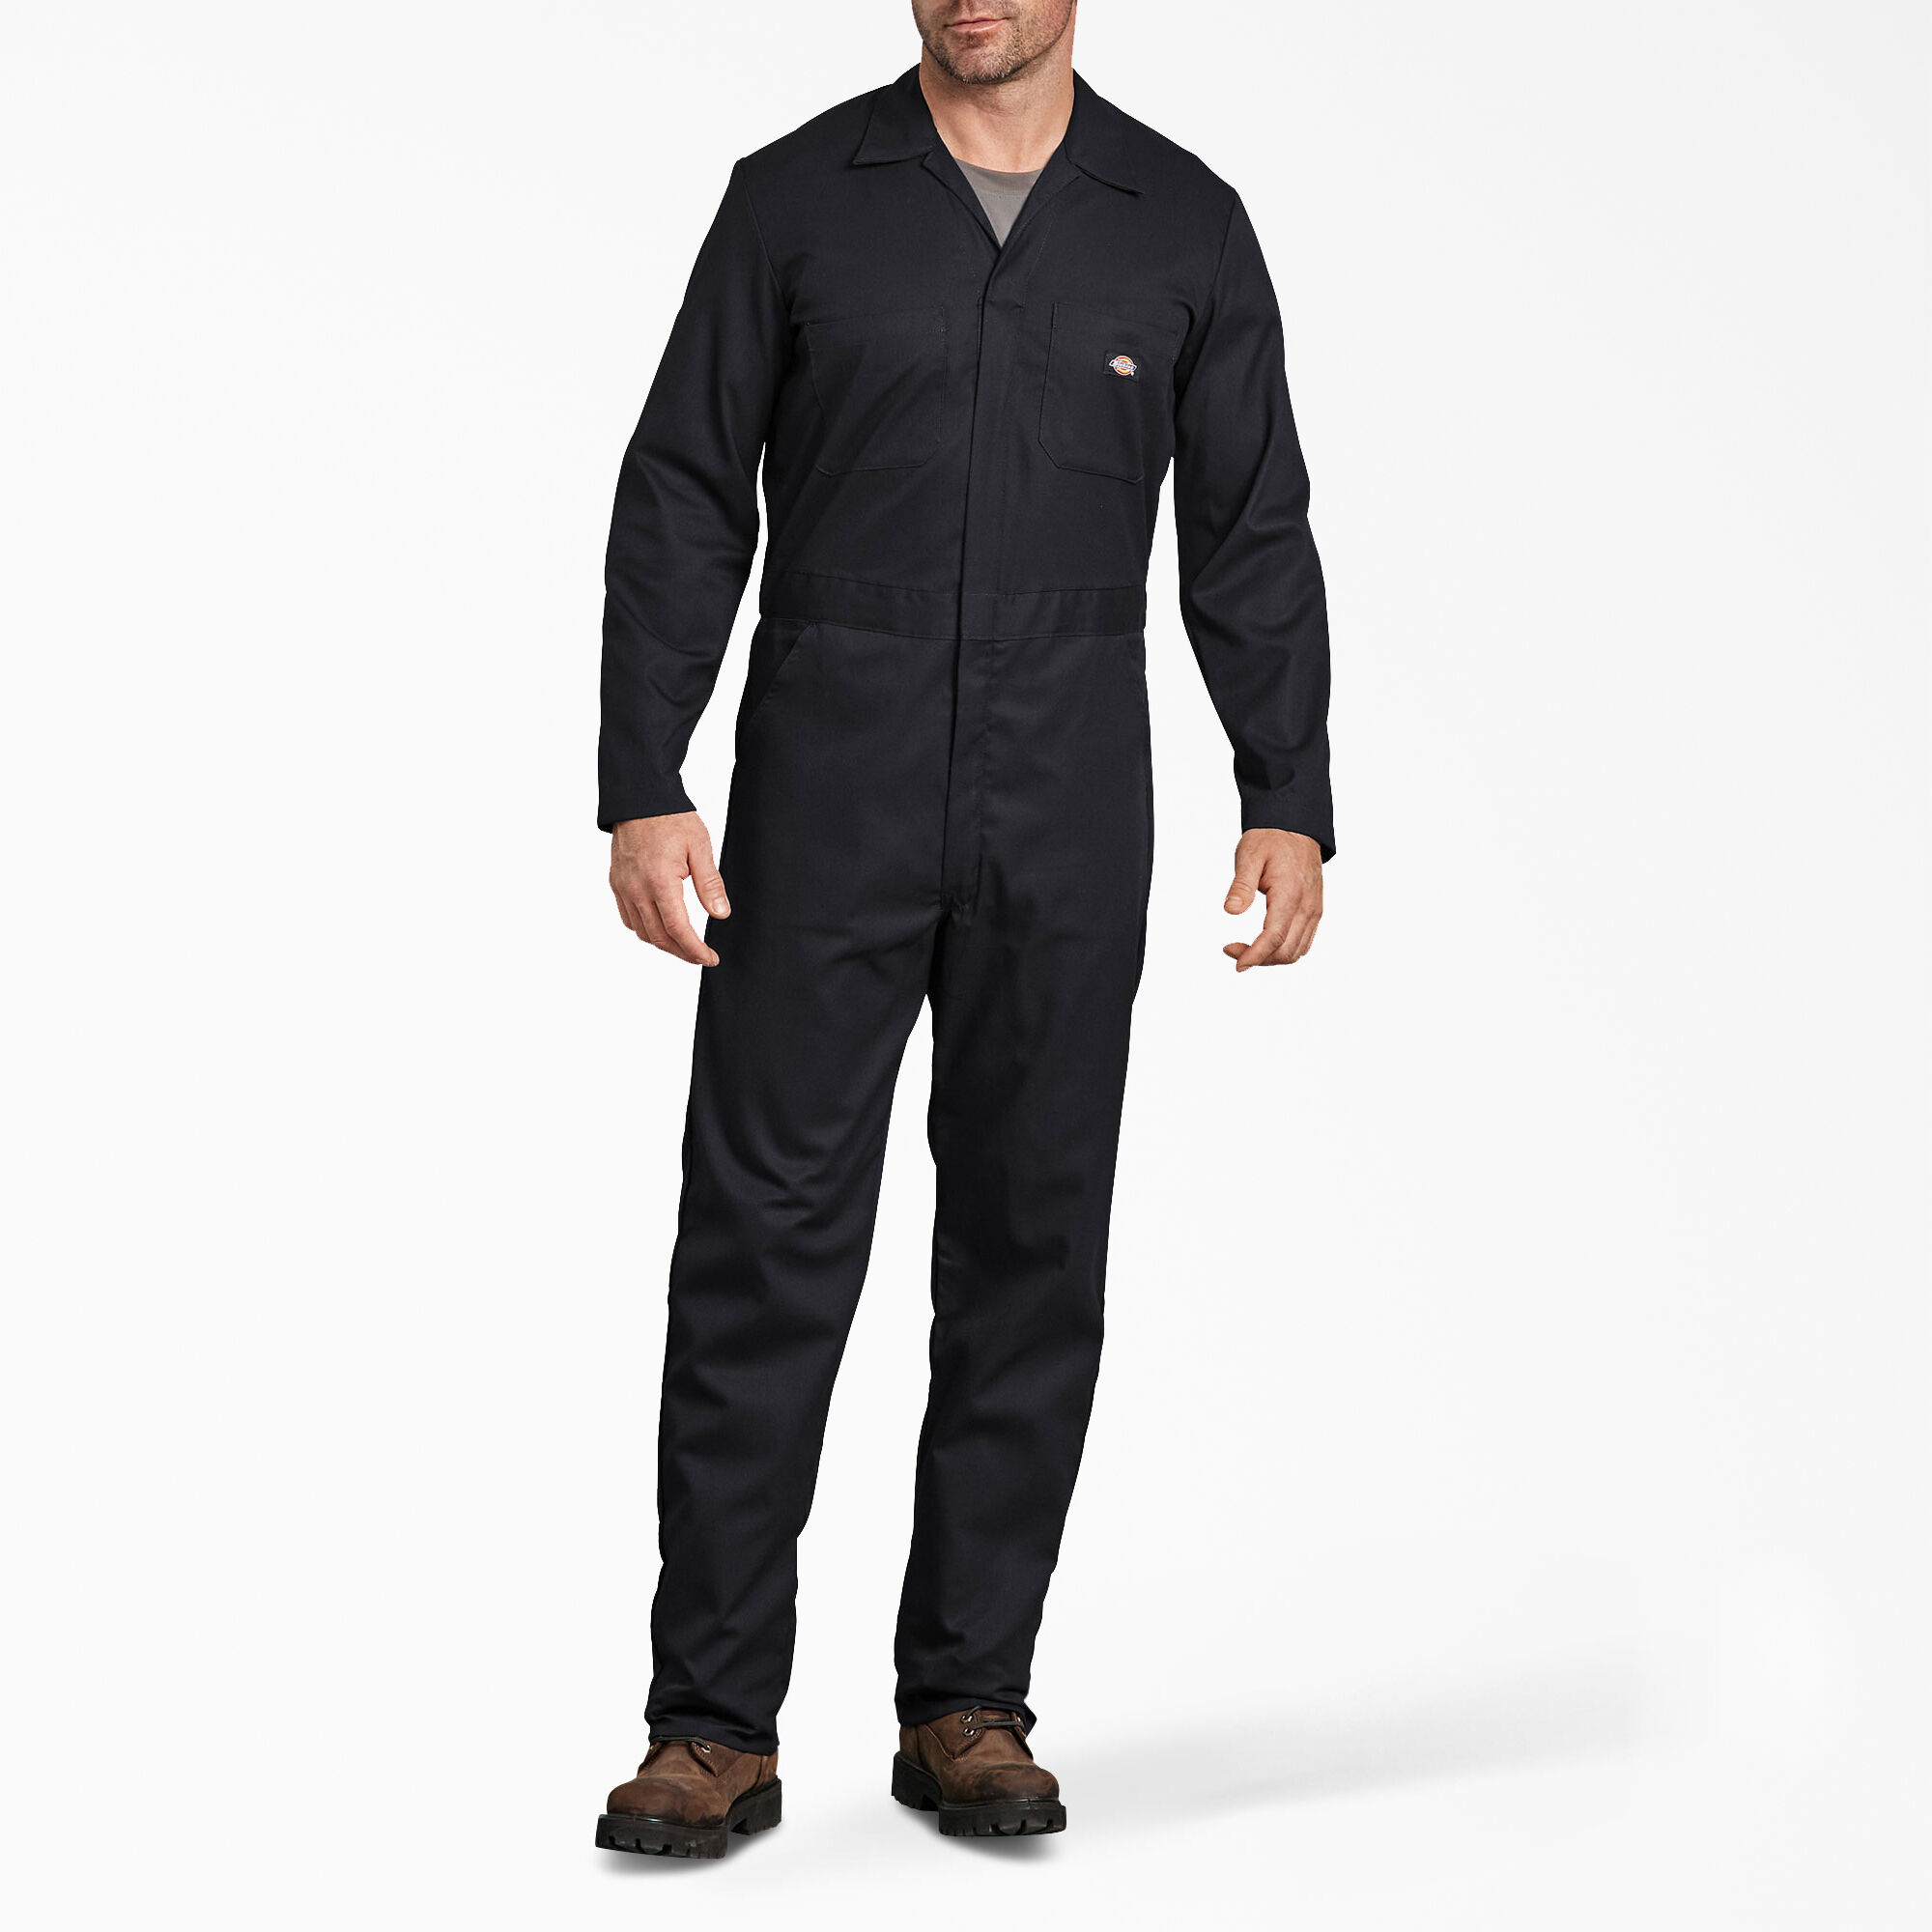 Ladies Or Mens Navy Blue Colour Boilersuit Or Overalls. 